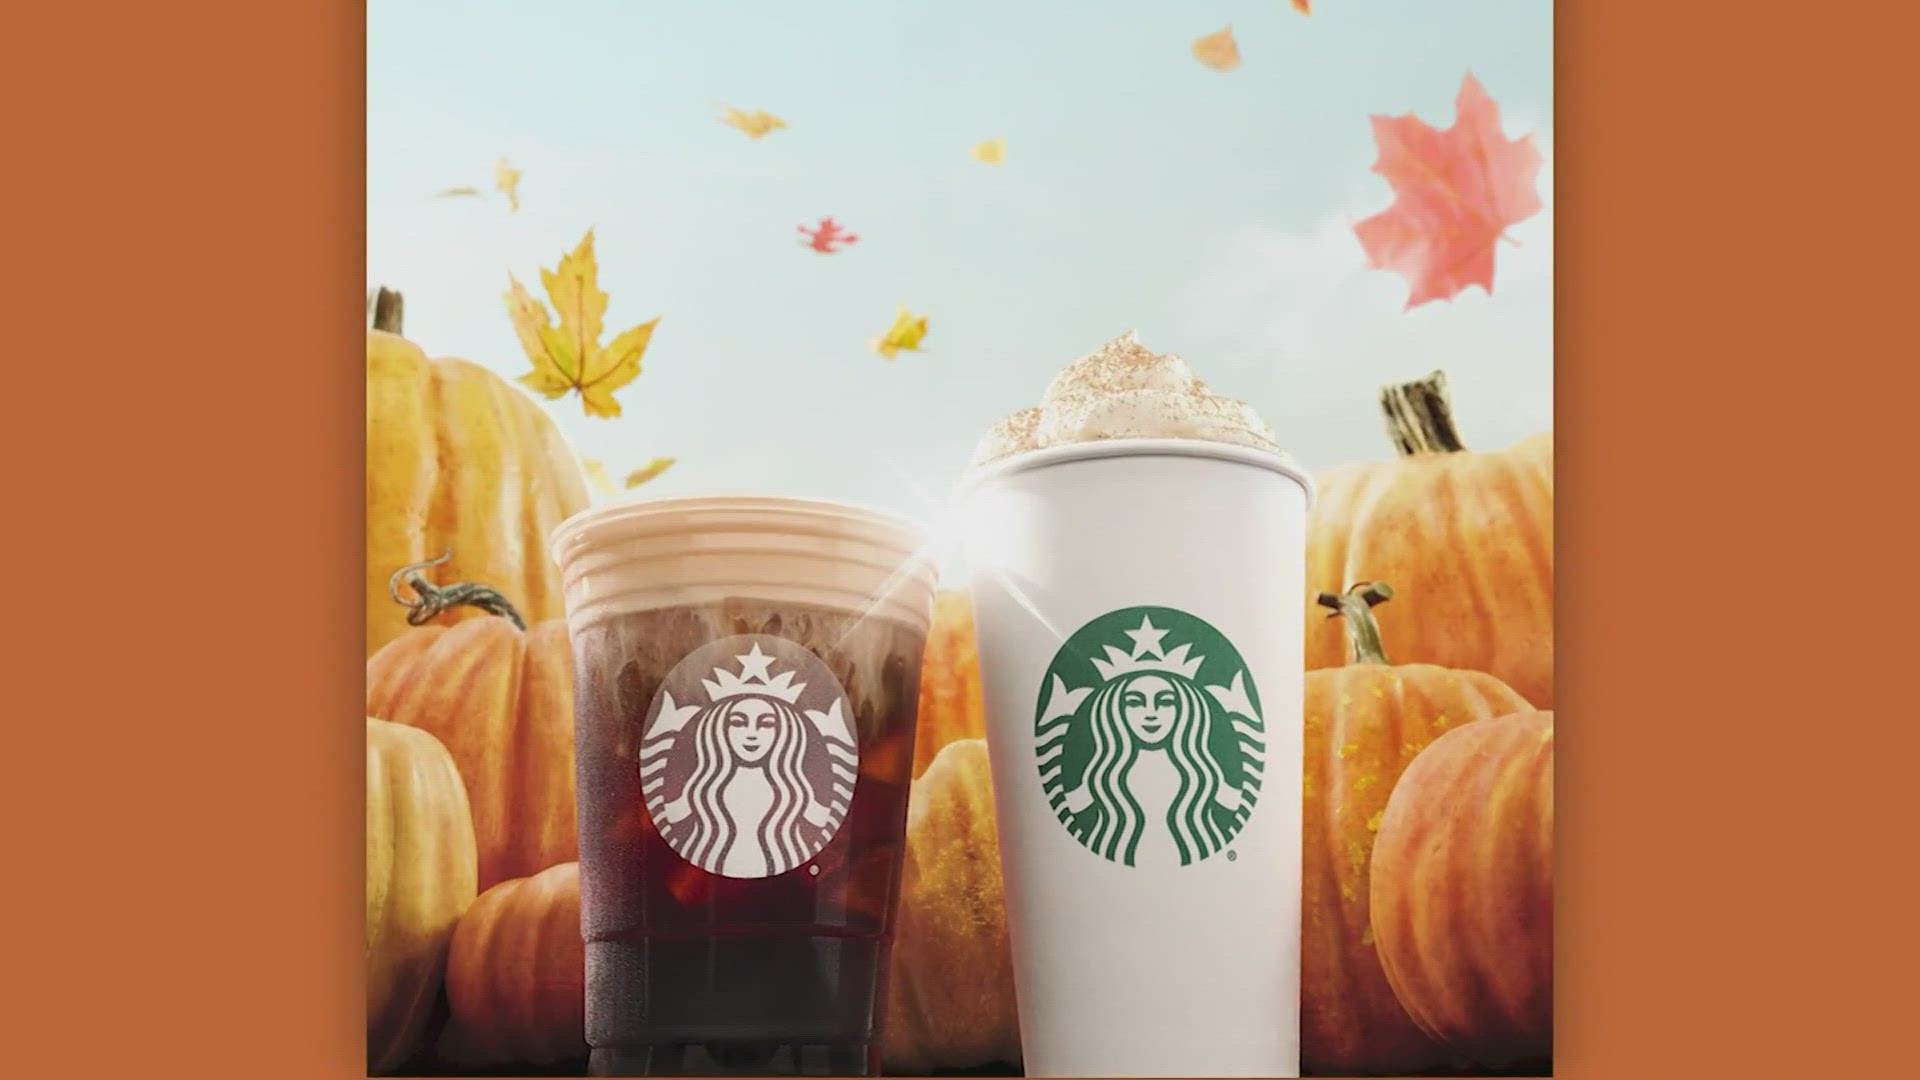 Starbucks has released its fall lineup, including the iconic Pumpkin Spice Latte, back for a 20th year.